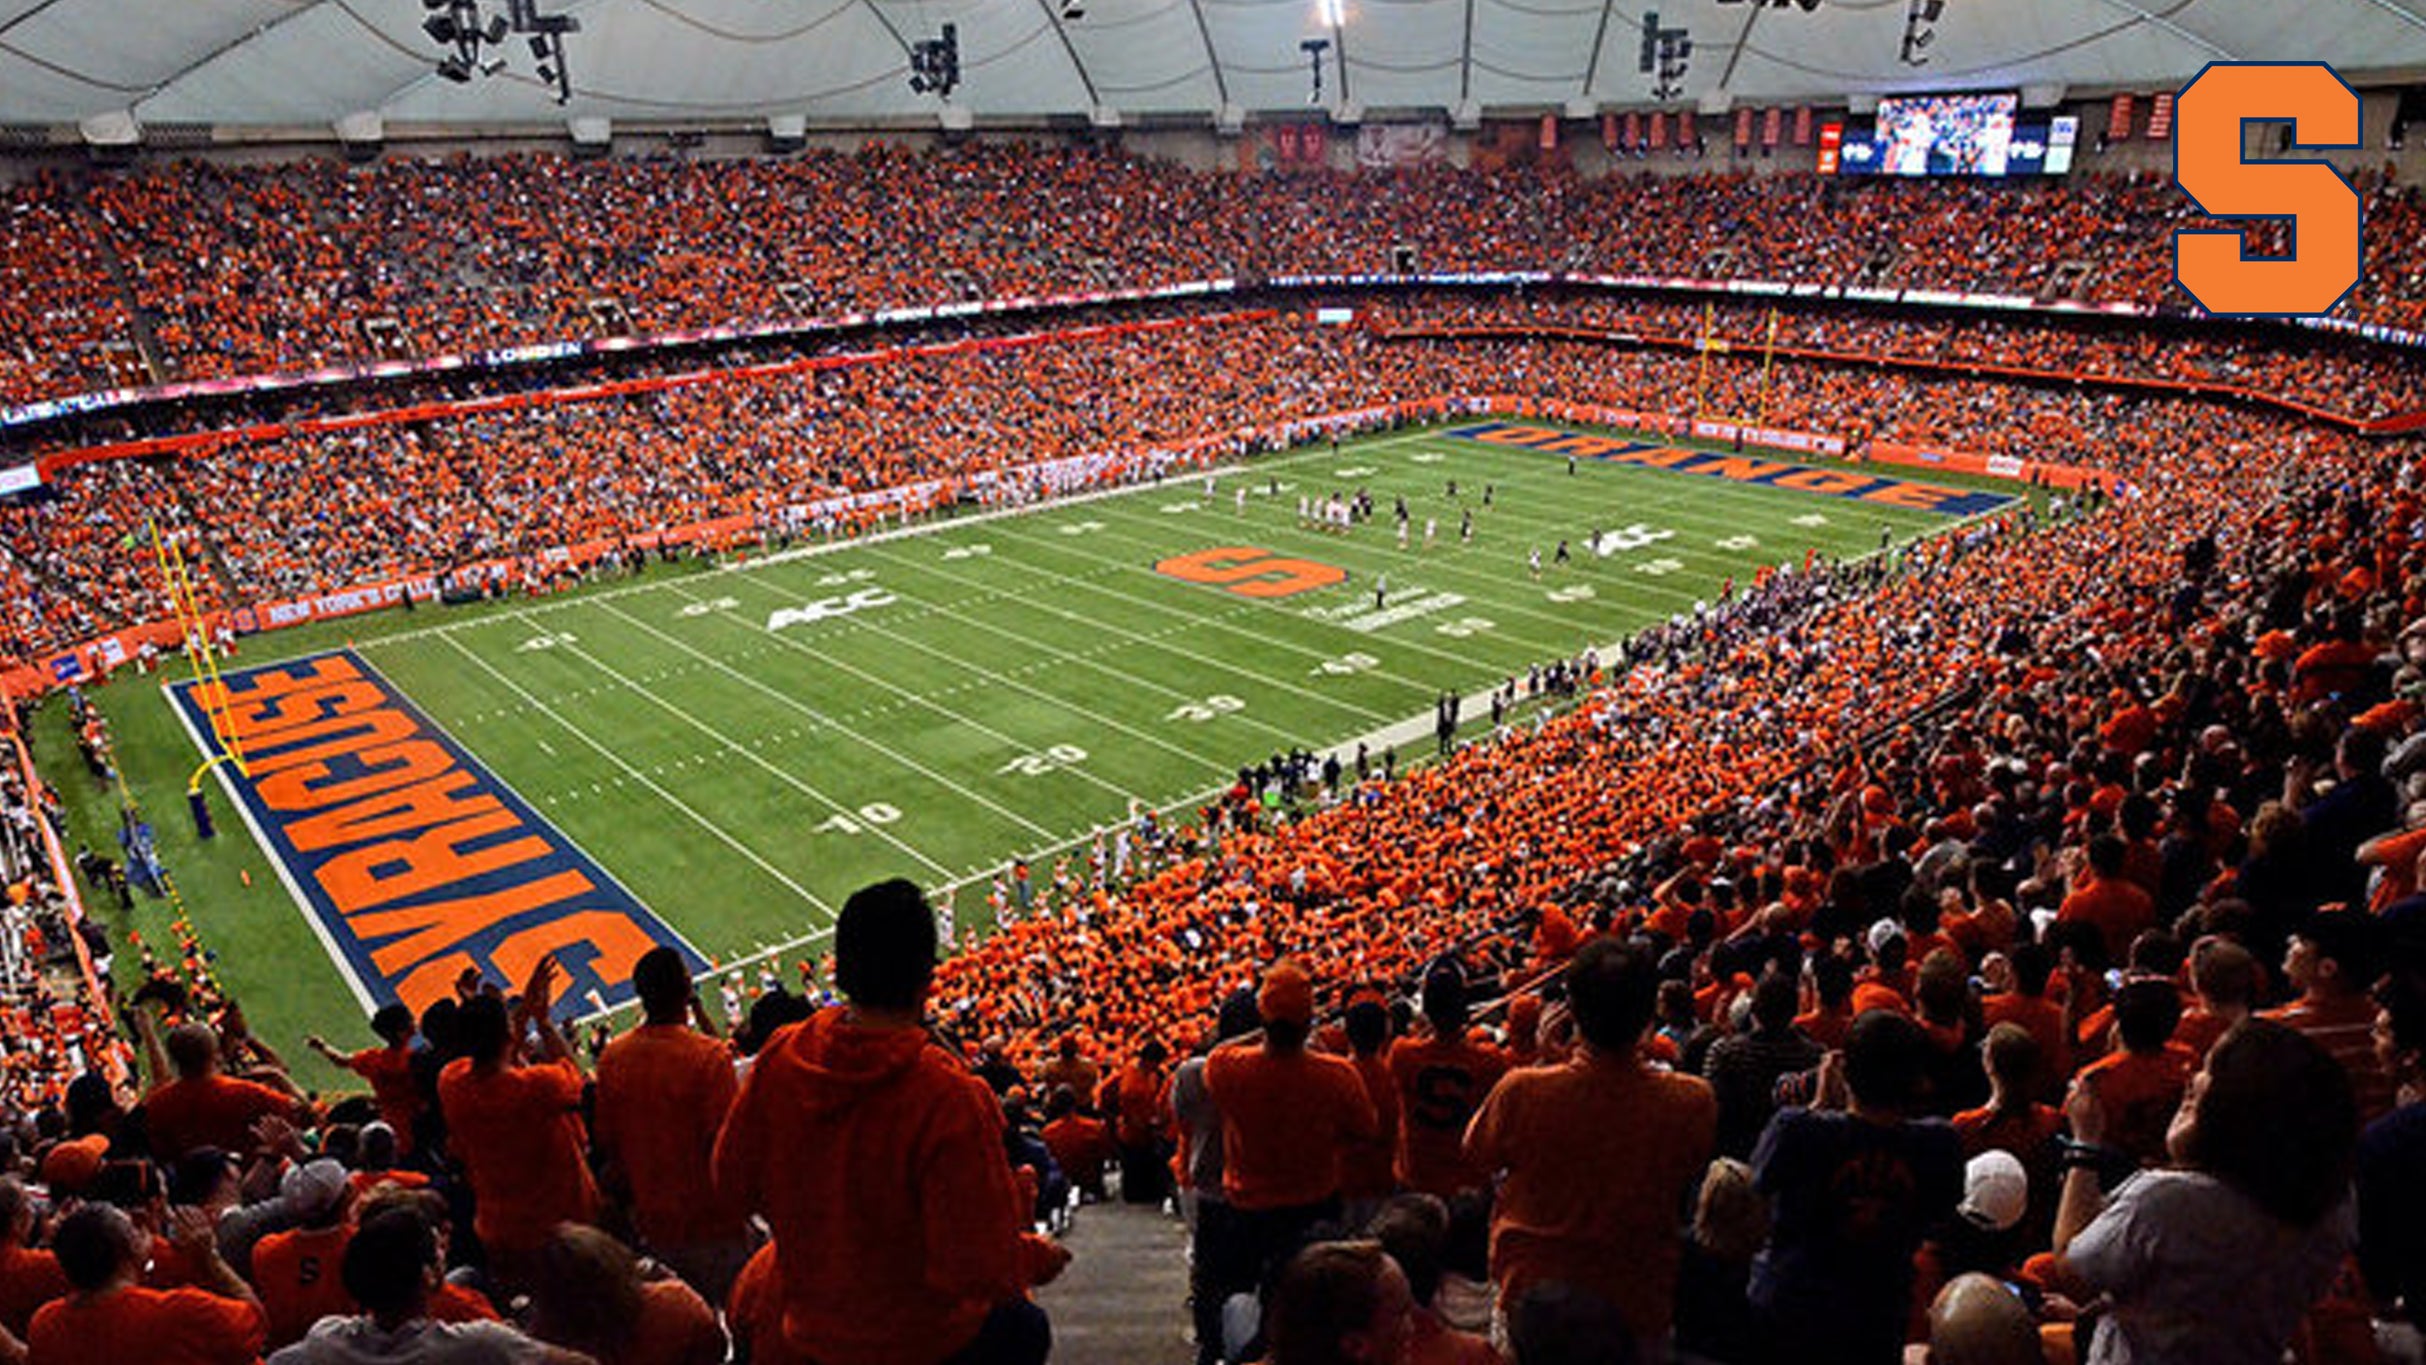 Syracuse Orange Football v Holy Cross Crusaders Football in Syracuse promo photo for Donor / STH presale offer code